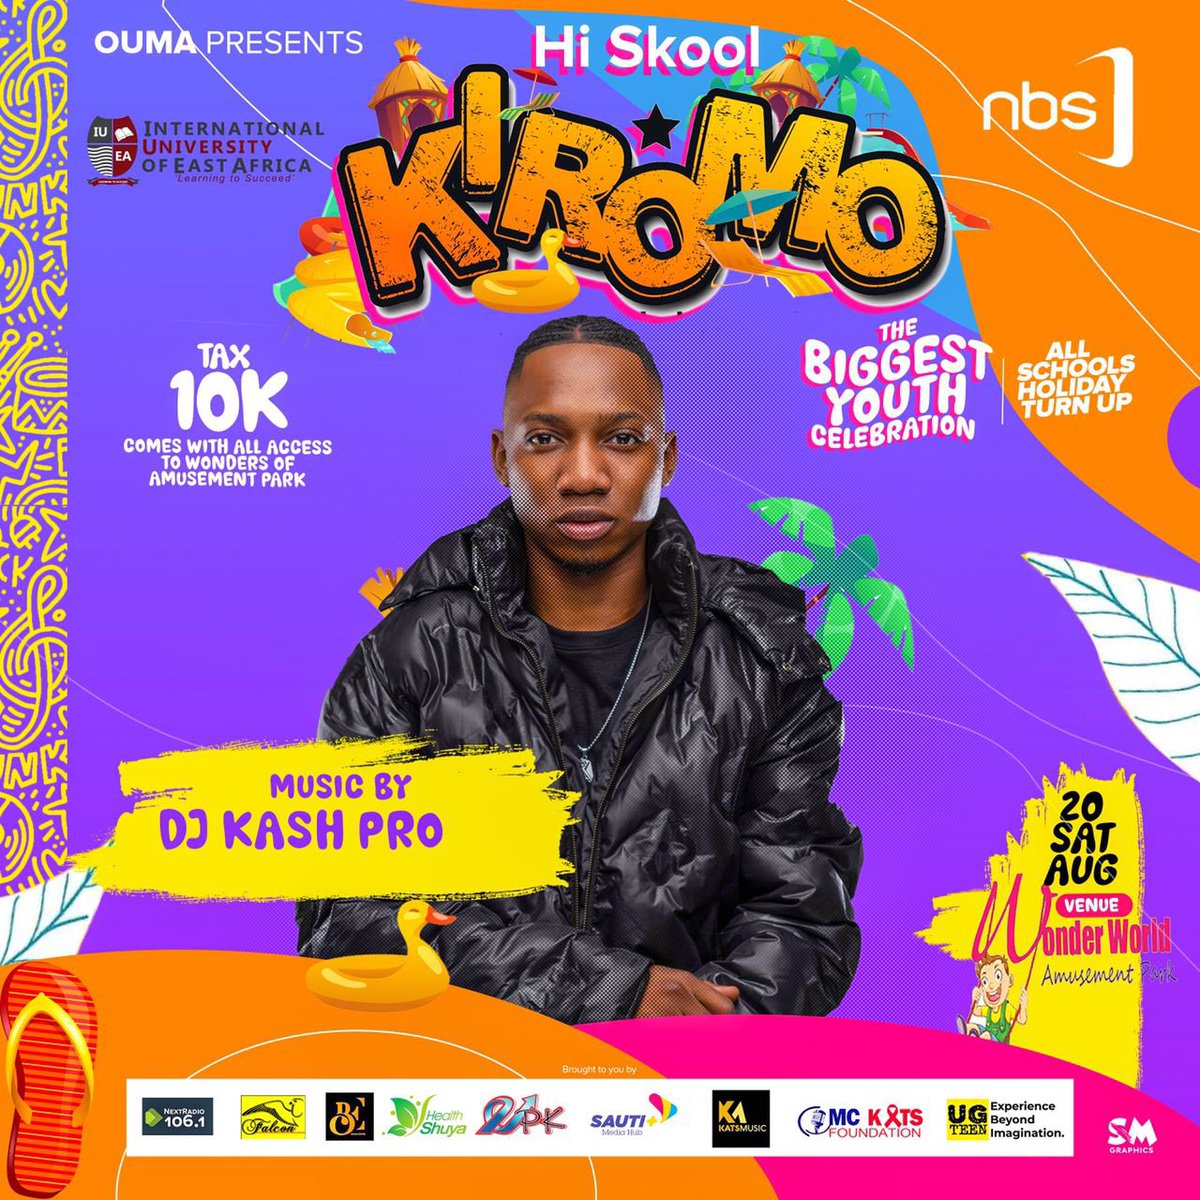 This weekend ♥️🦅
Turn up for dem good vibes #HiSkoolKiromo with @LuoboyOllo 🔥